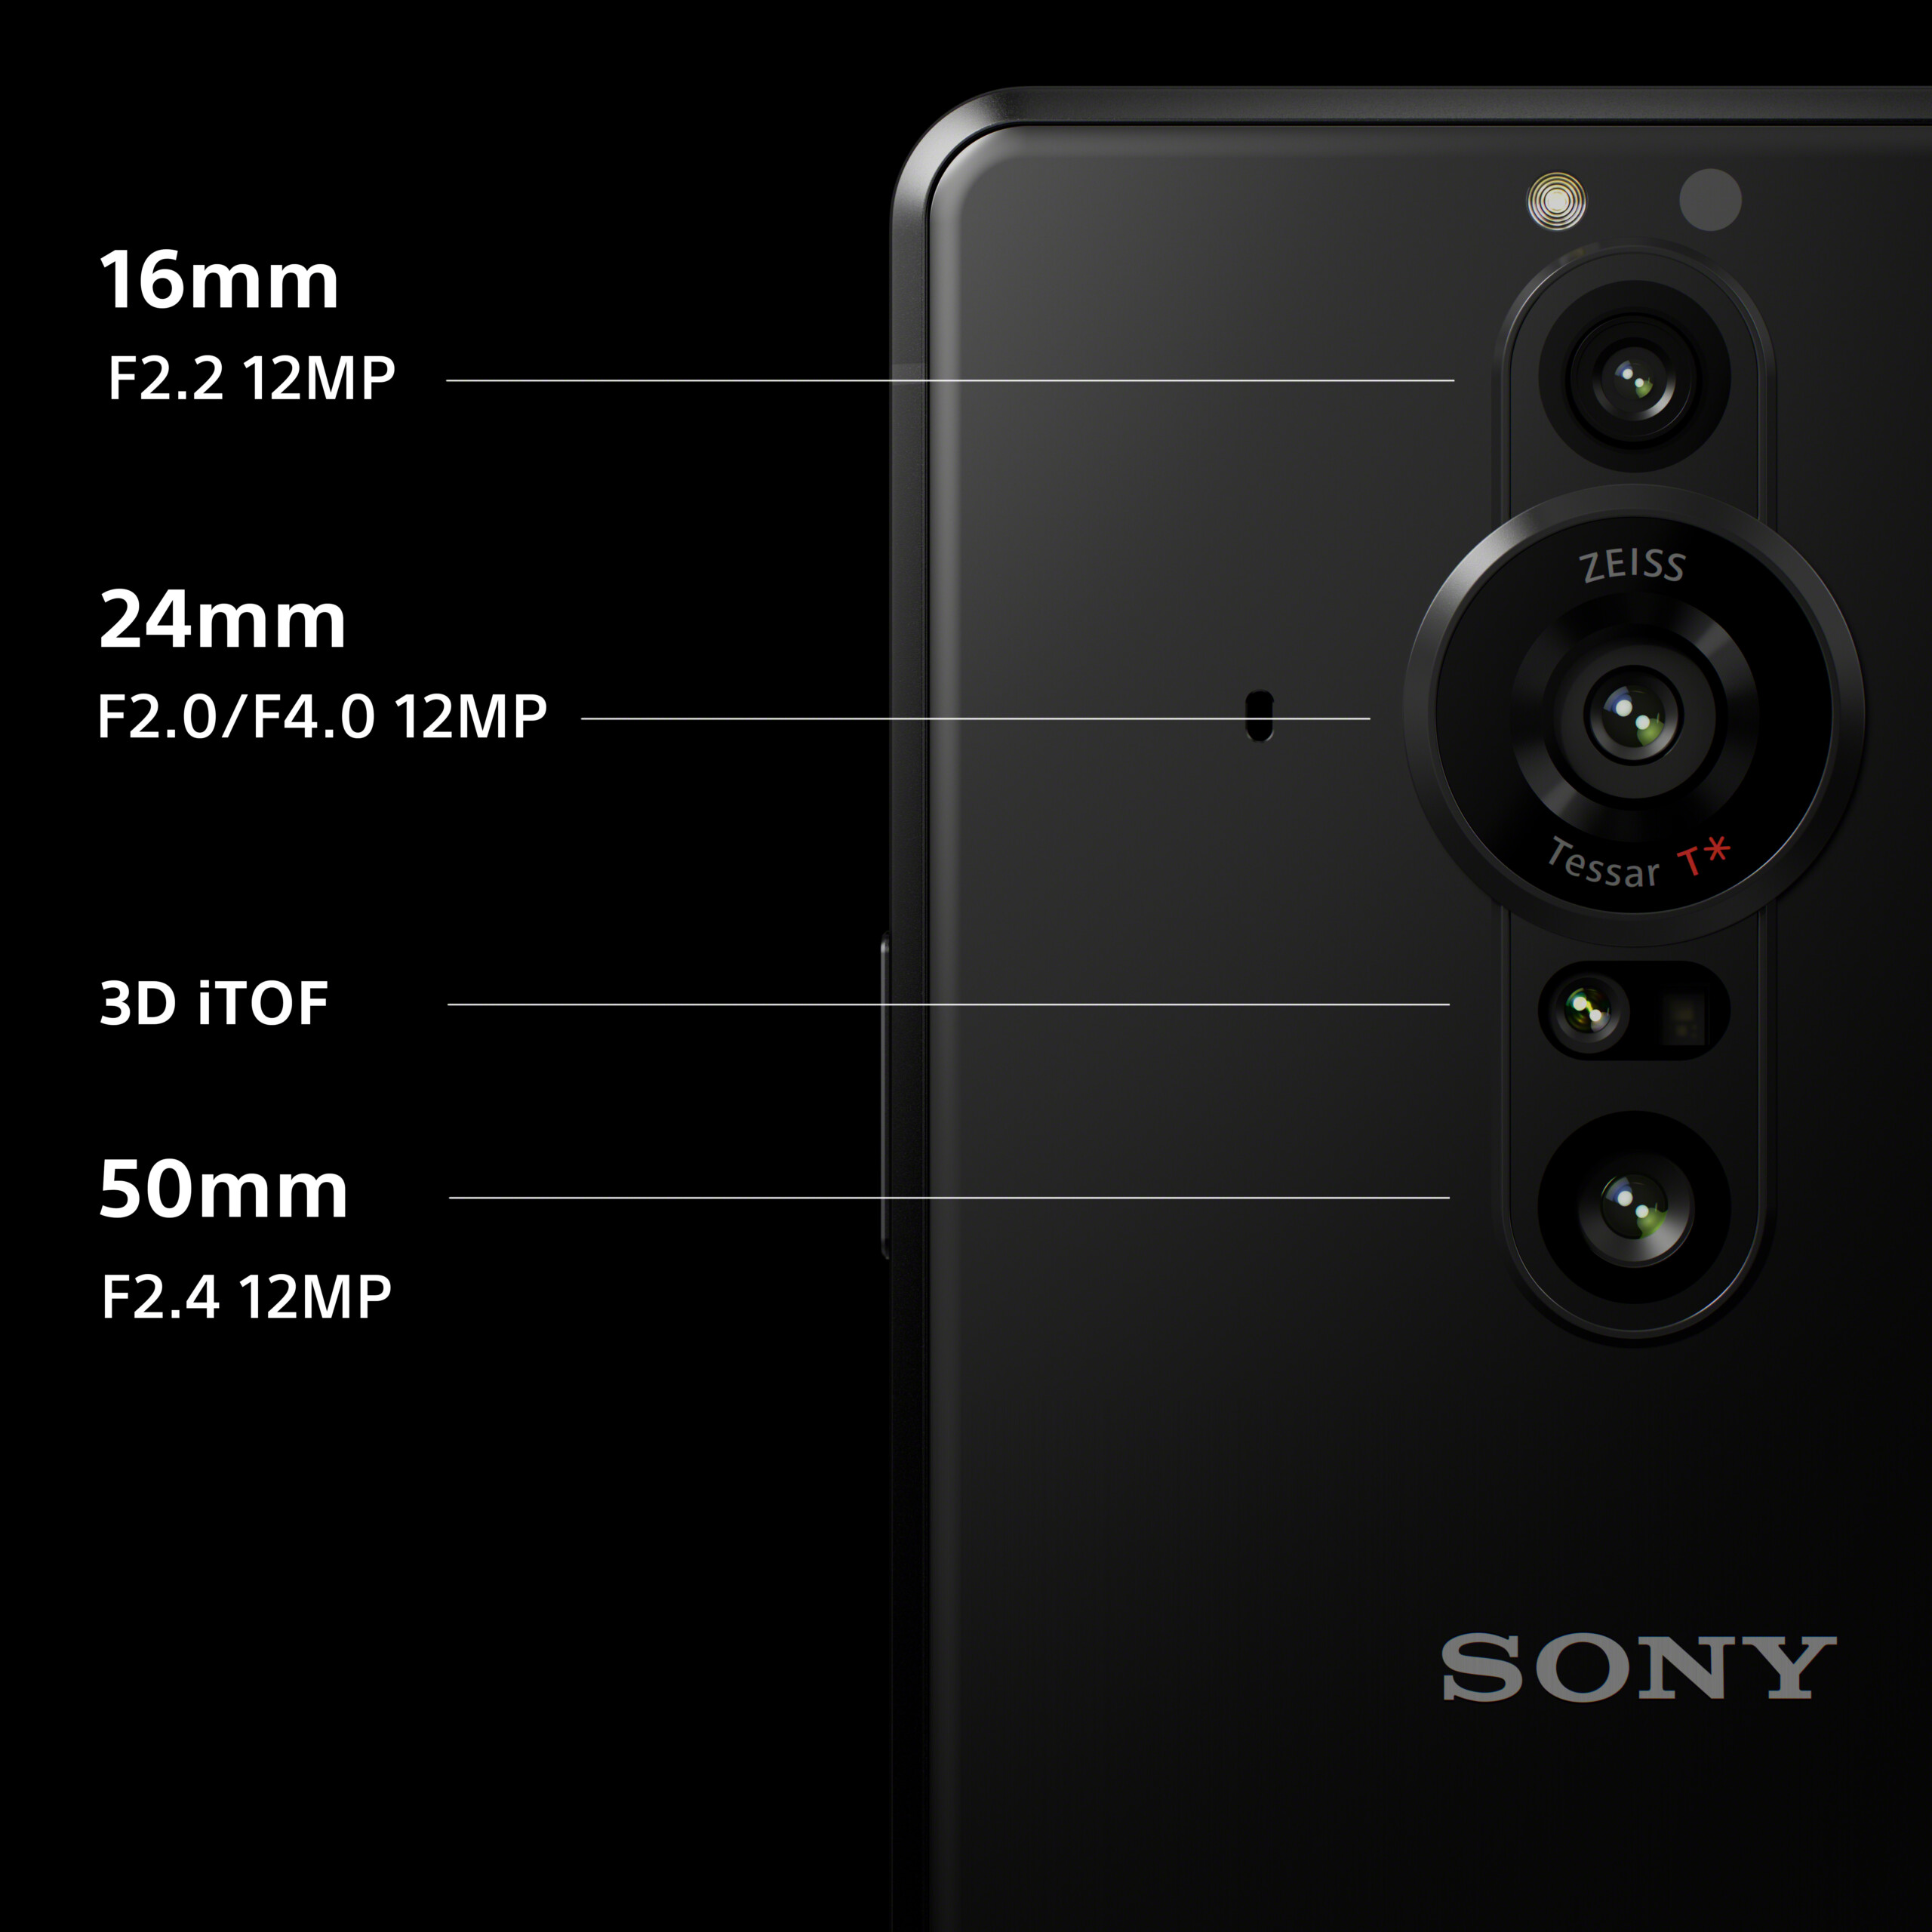 xperia-pro-i-cameralenstext-11-scaled.jpg